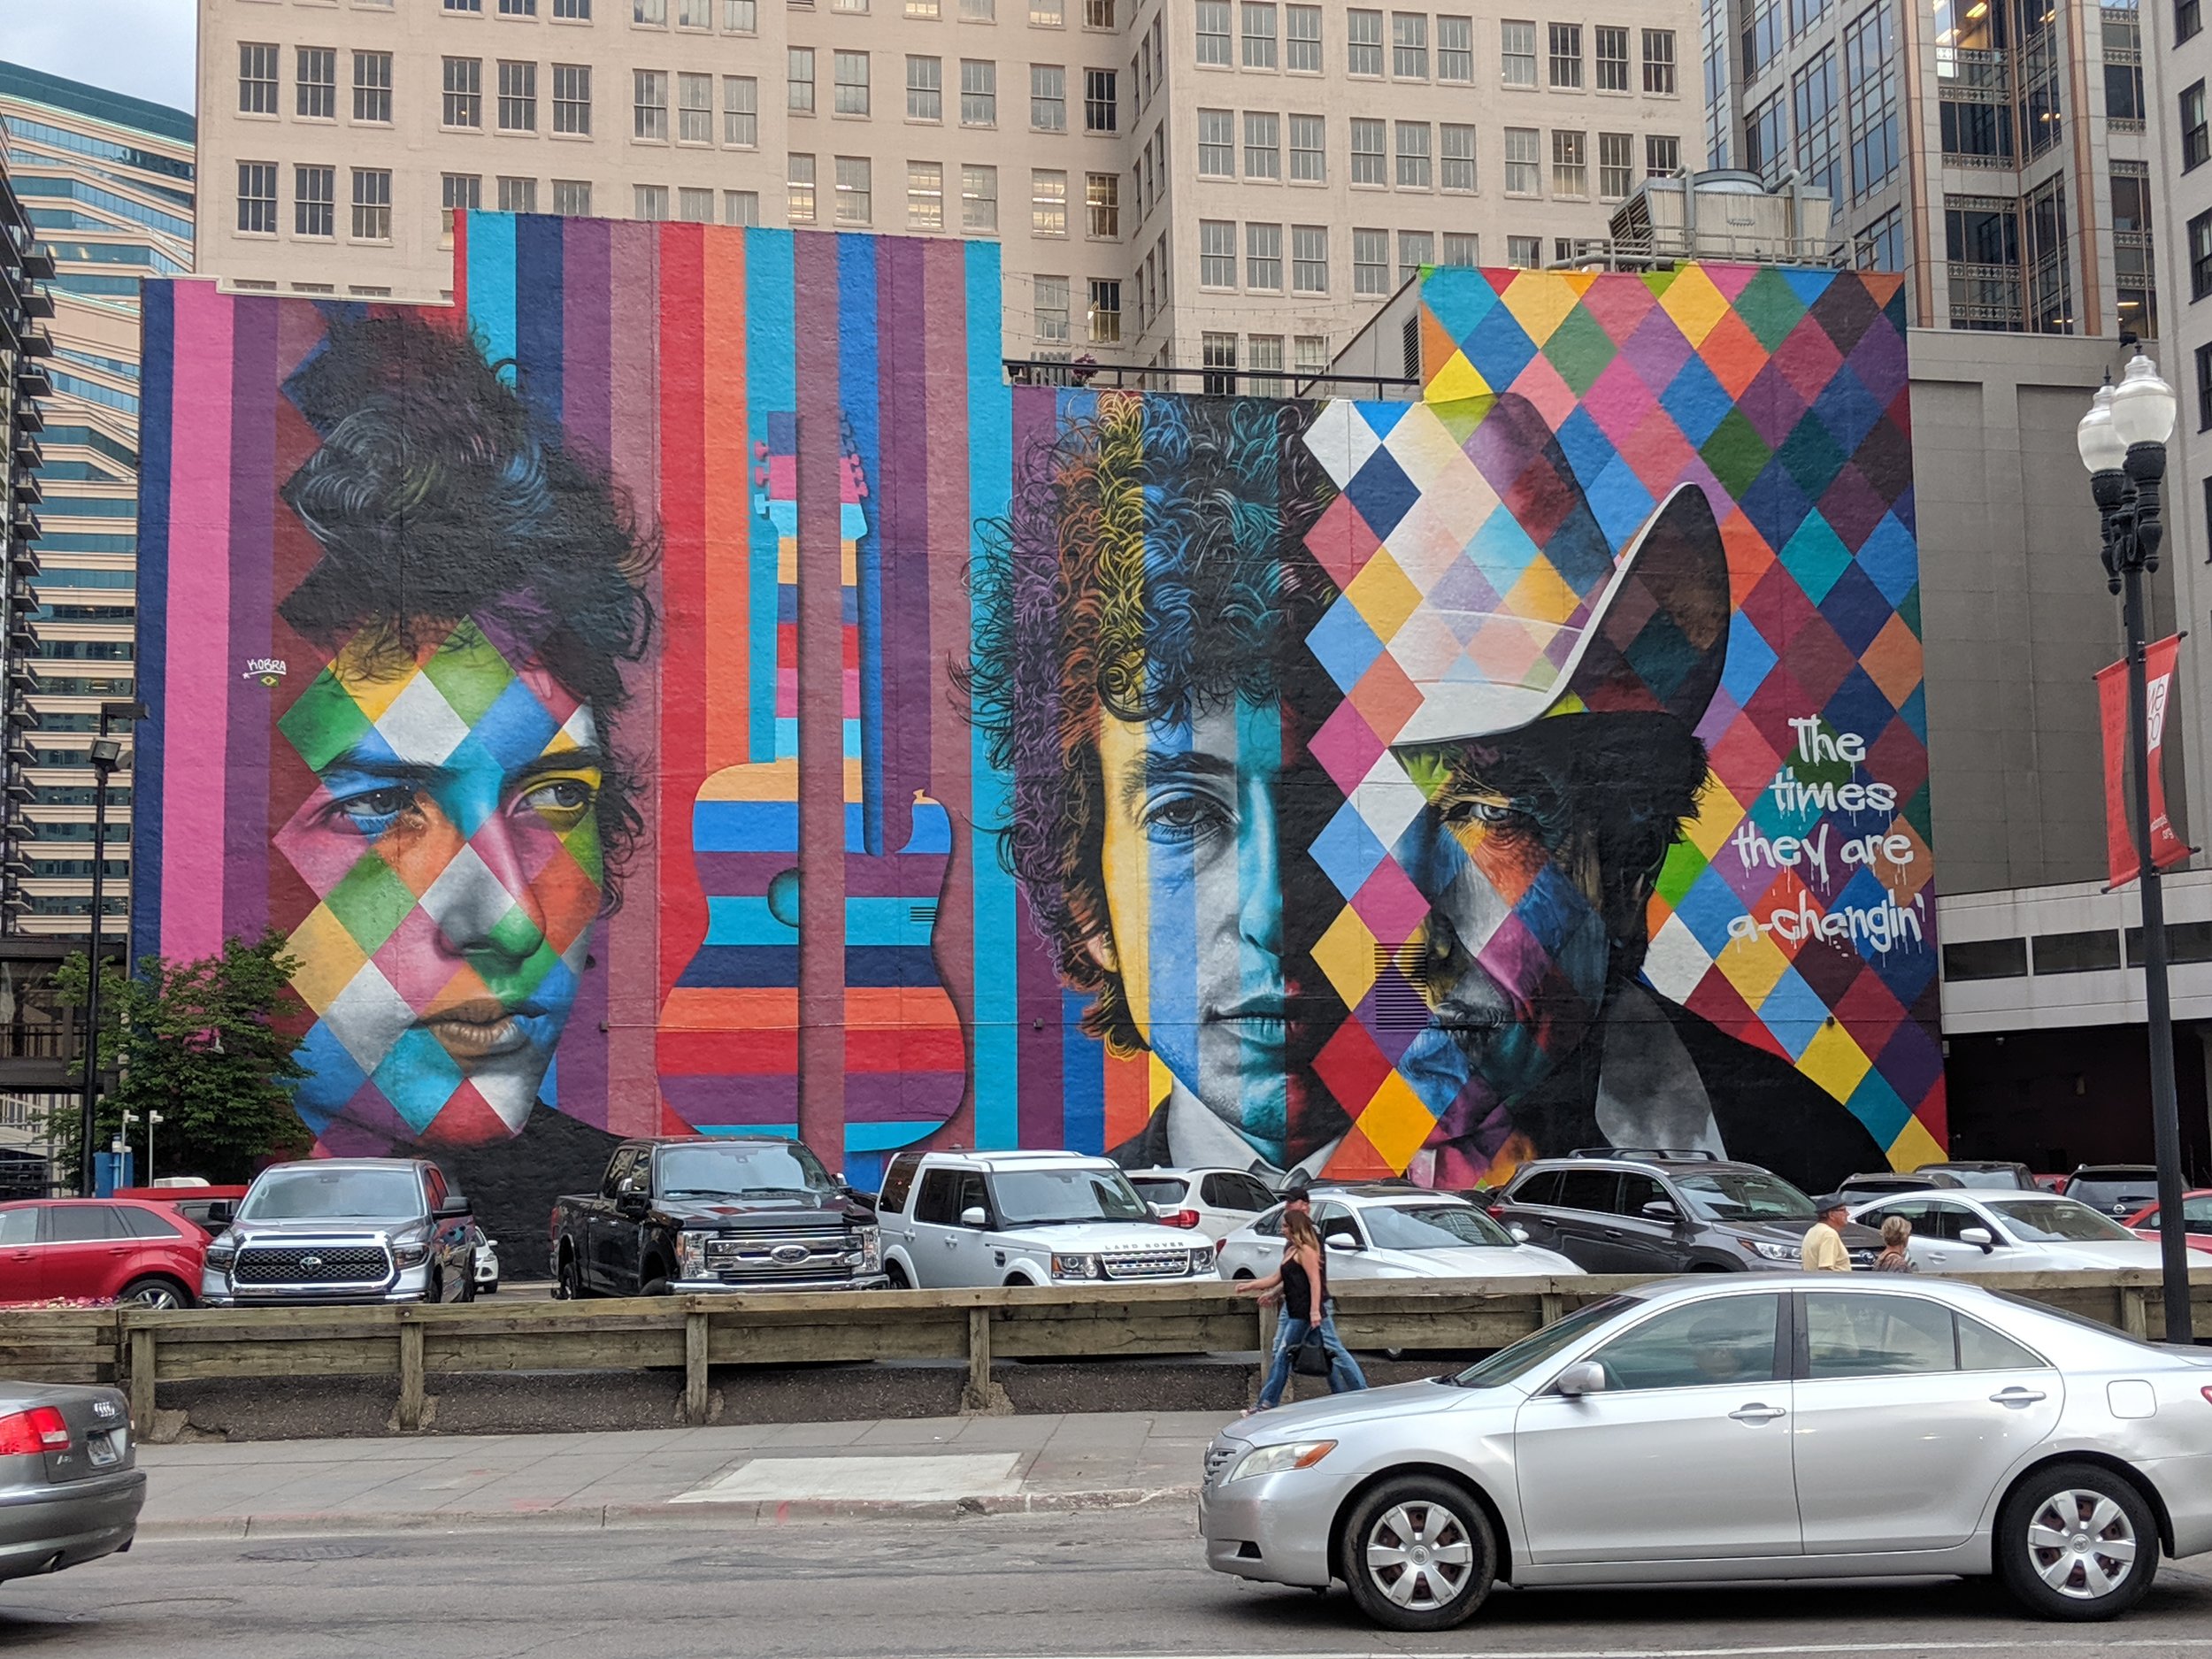  An iconic Minneapolis mural of the iconic Bob Dylan 